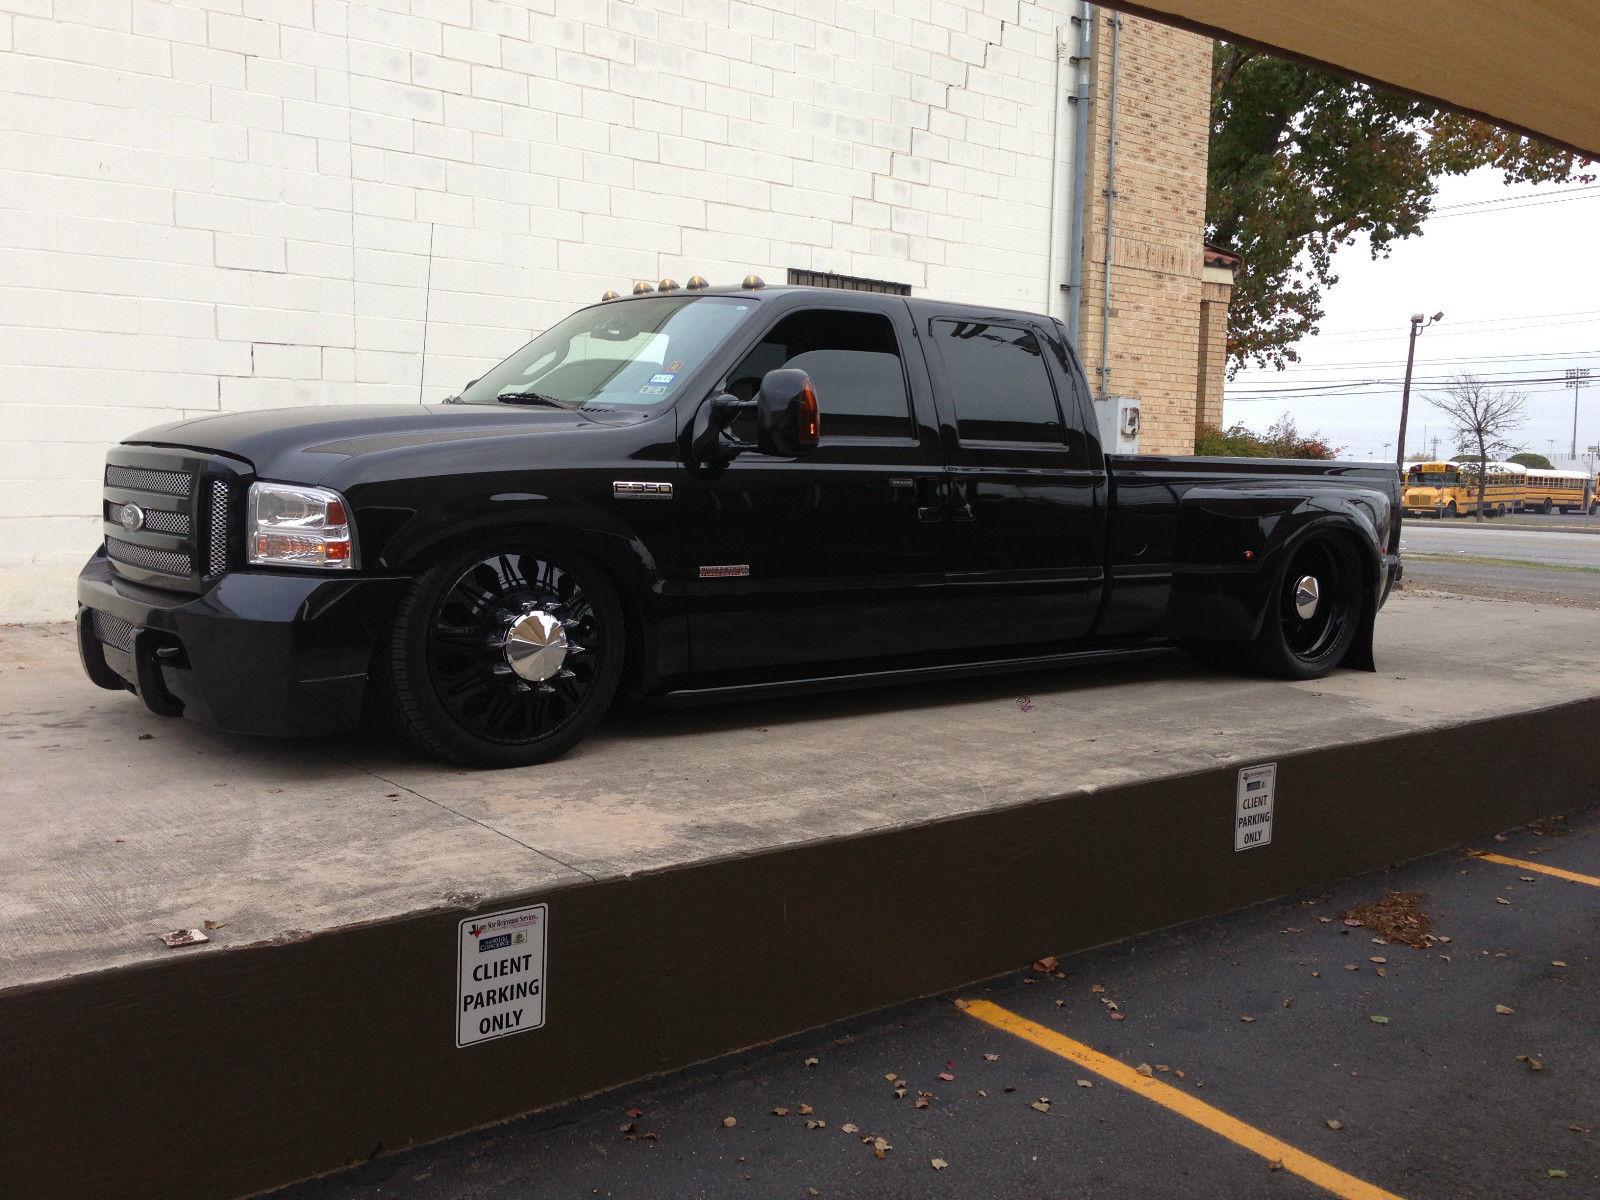 2006 Ford F 350 Custom Built Bagged Crew Cab Dually Diesel For Sale.